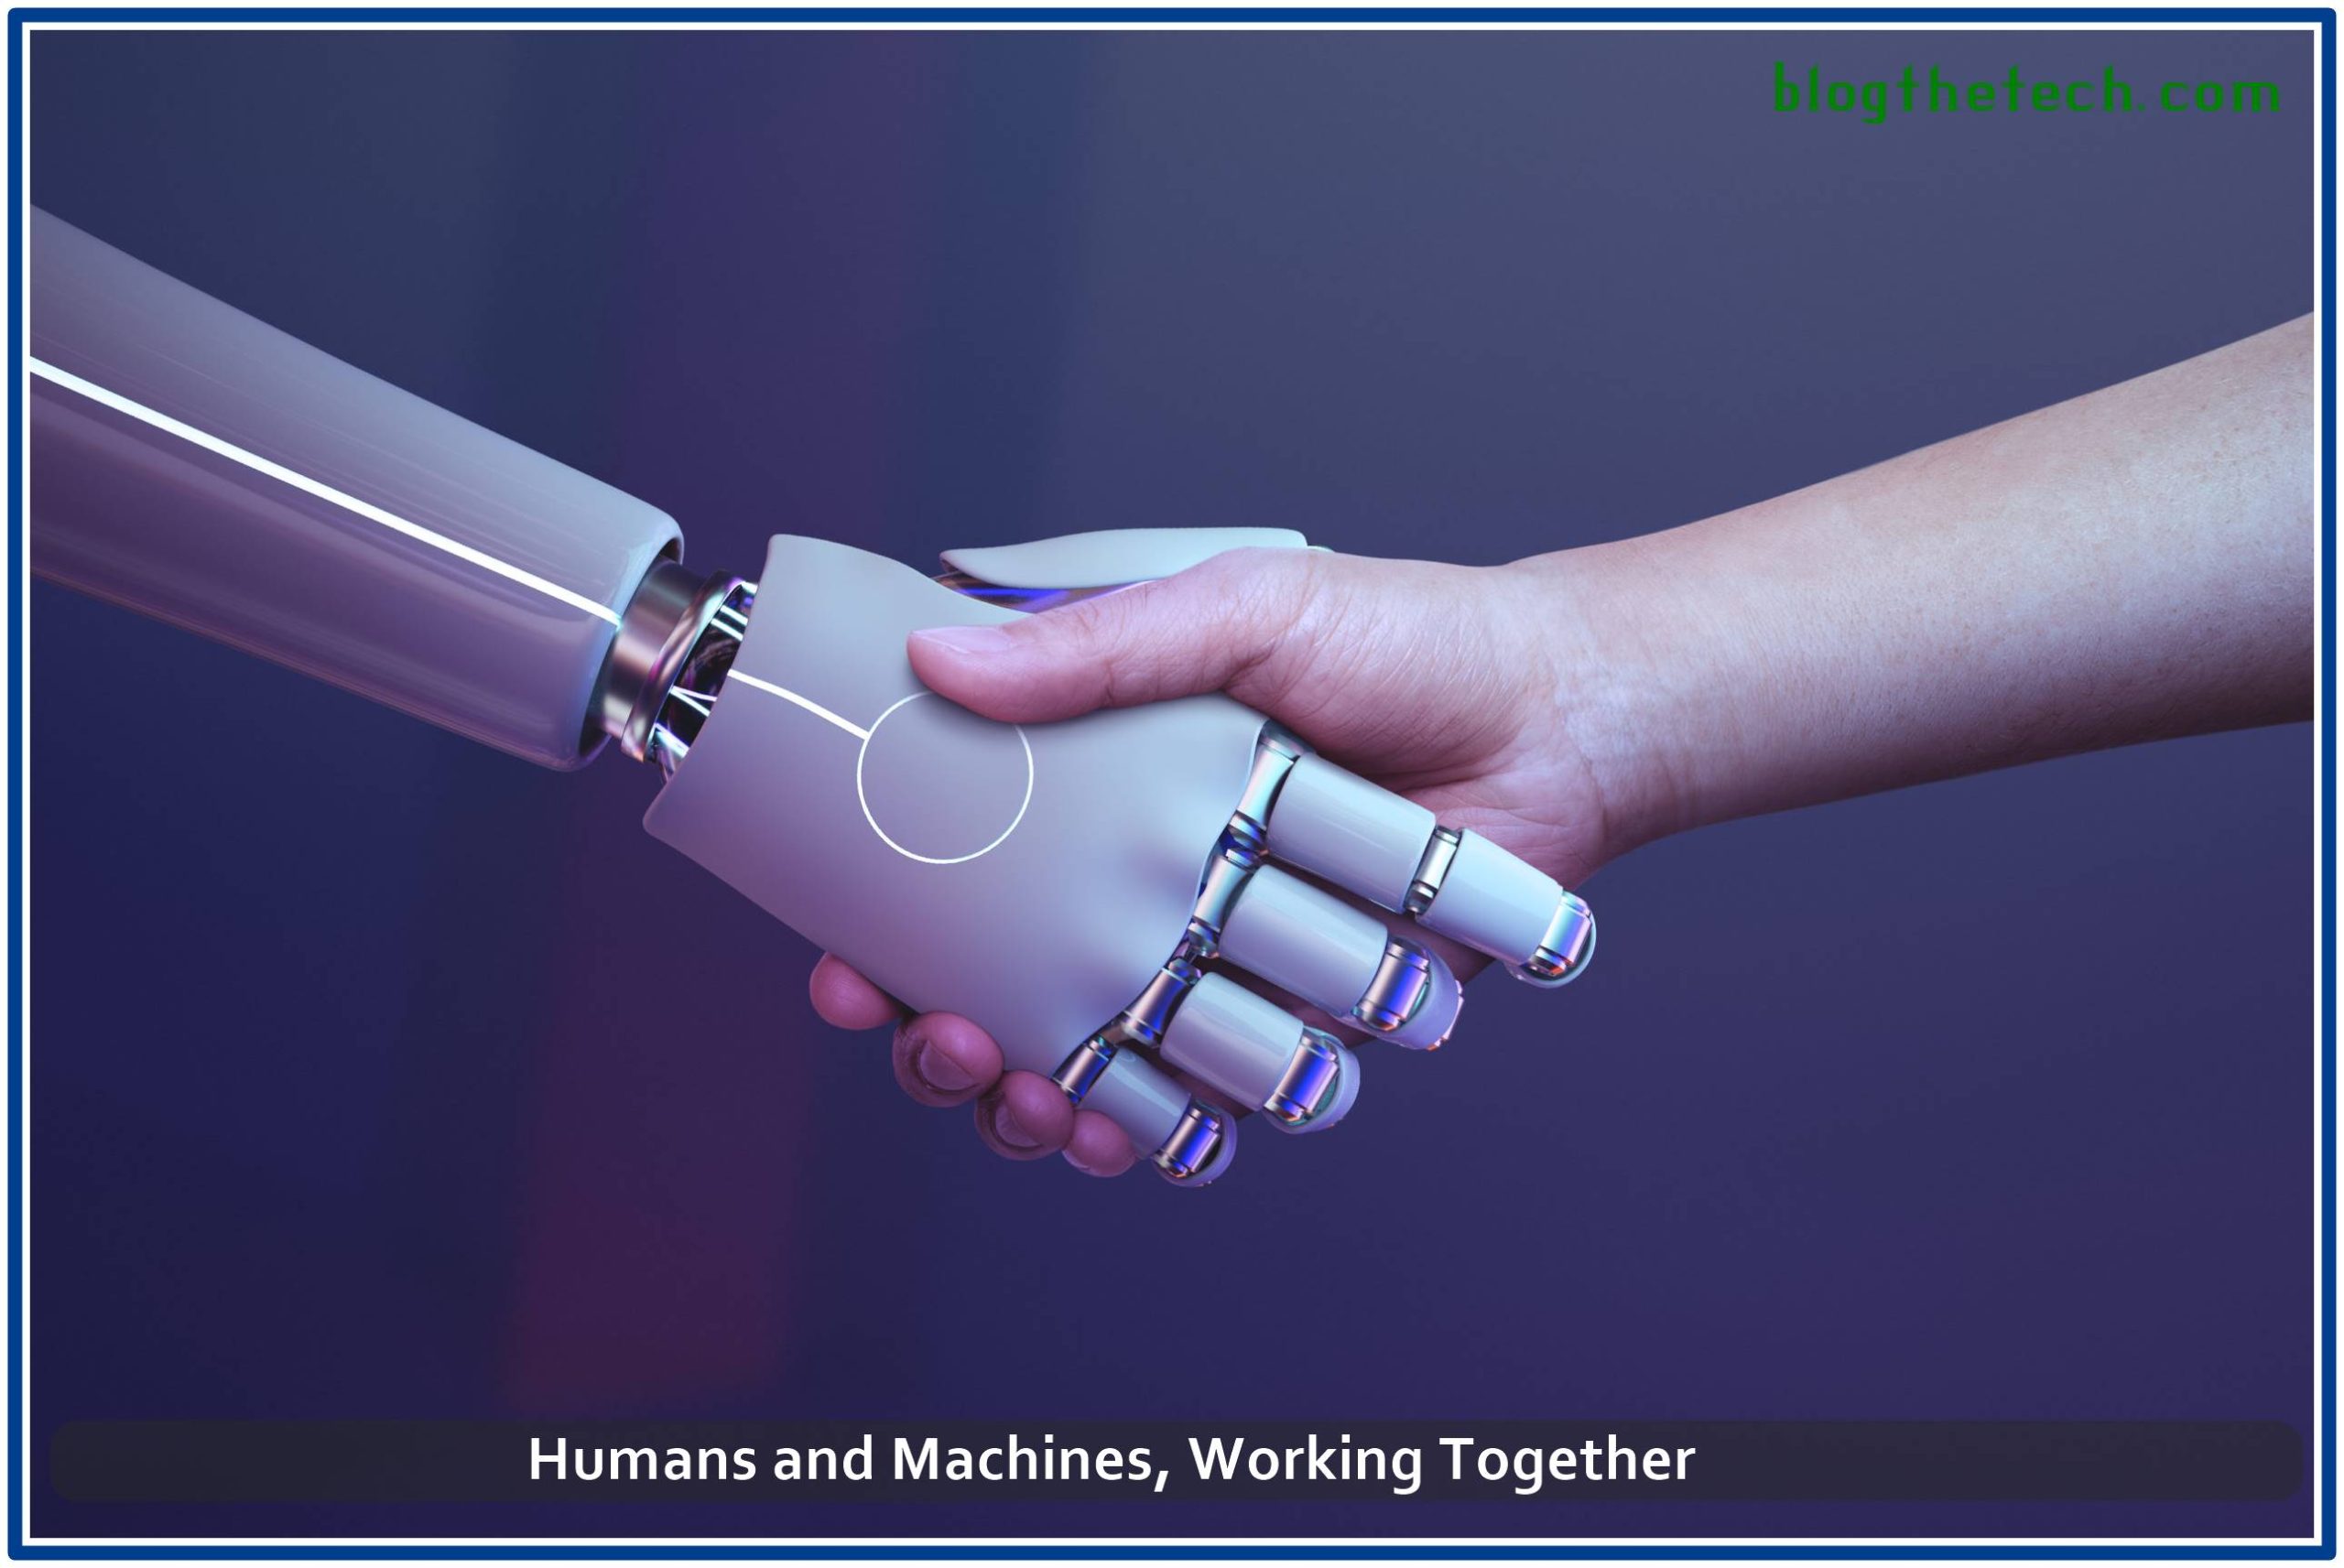 Humans and Machines Working Together